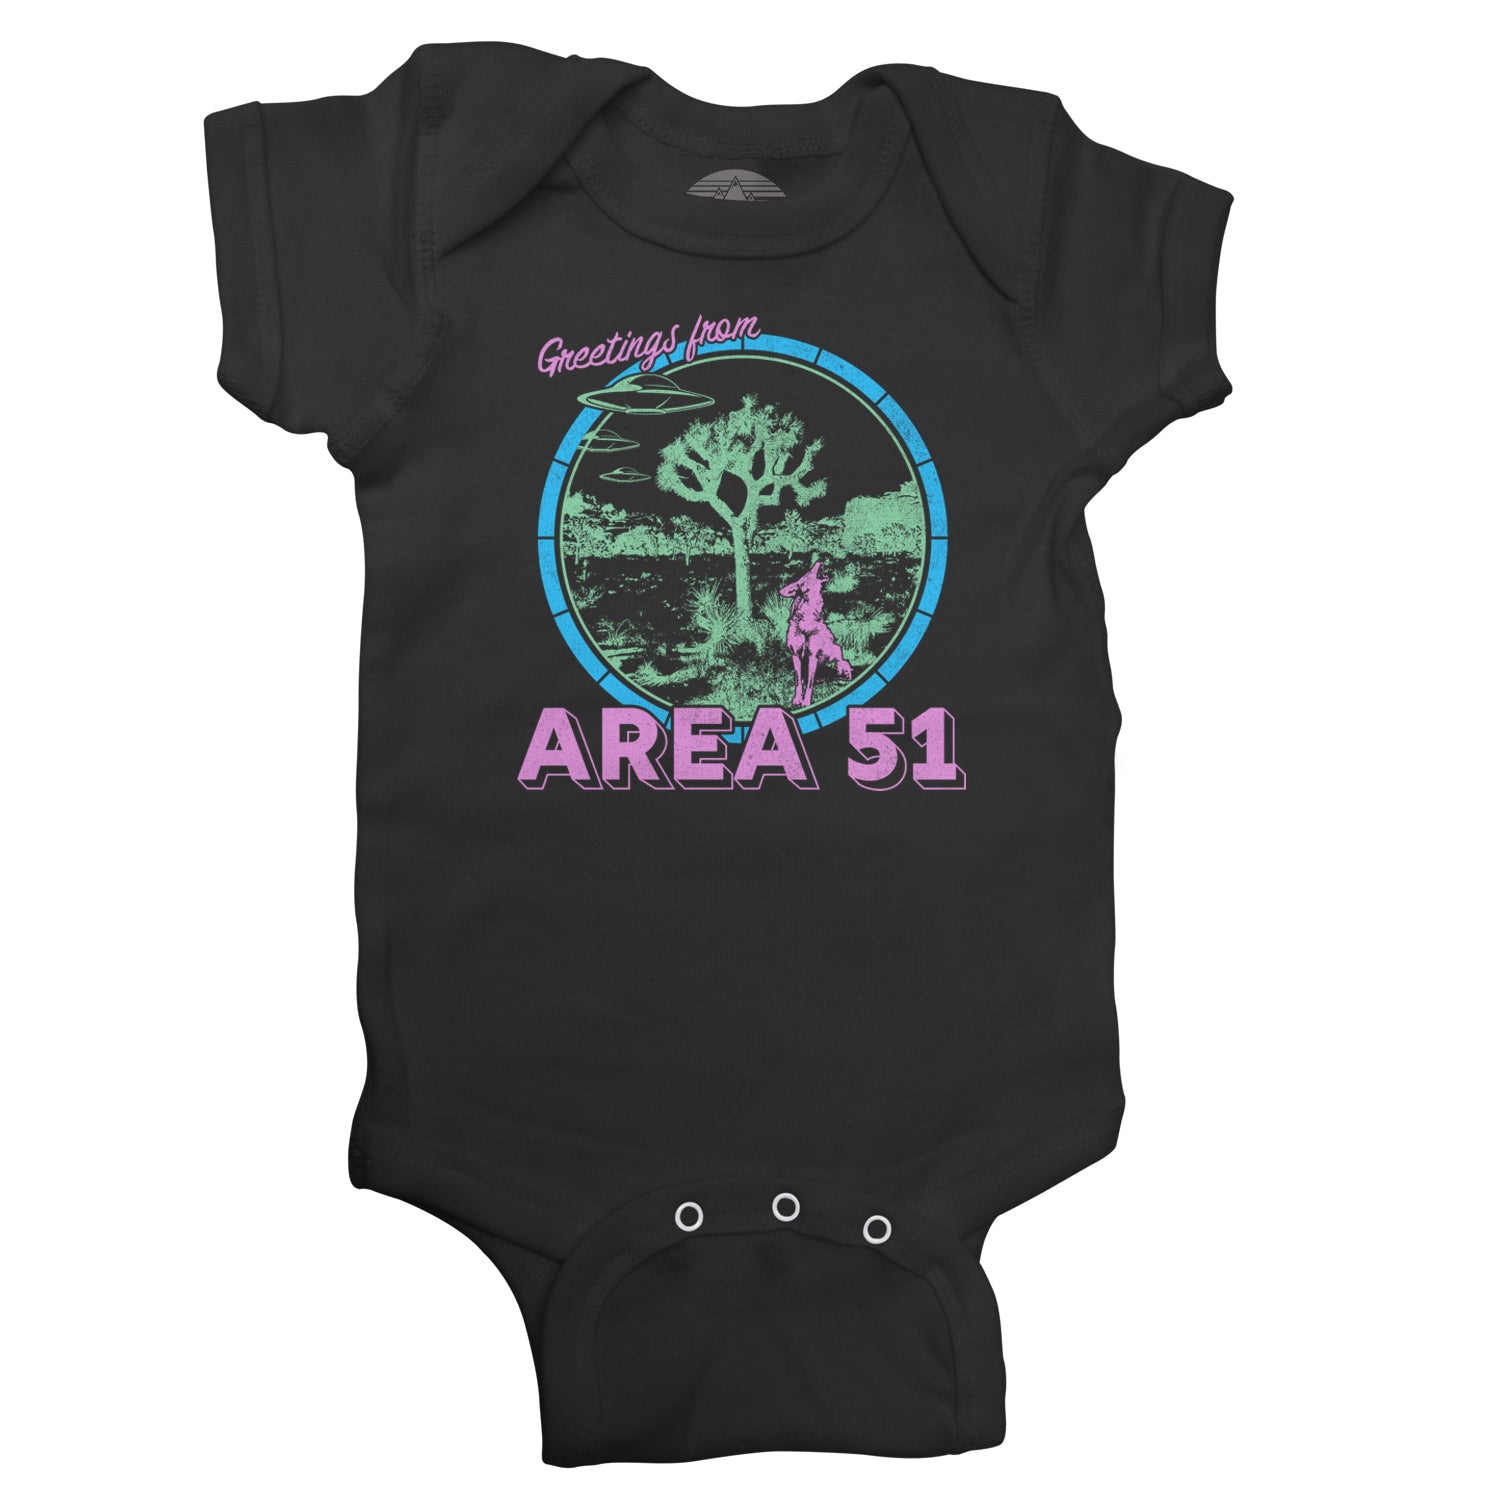 Greetings from Area 51 Infant Bodysuit - Unisex Fit